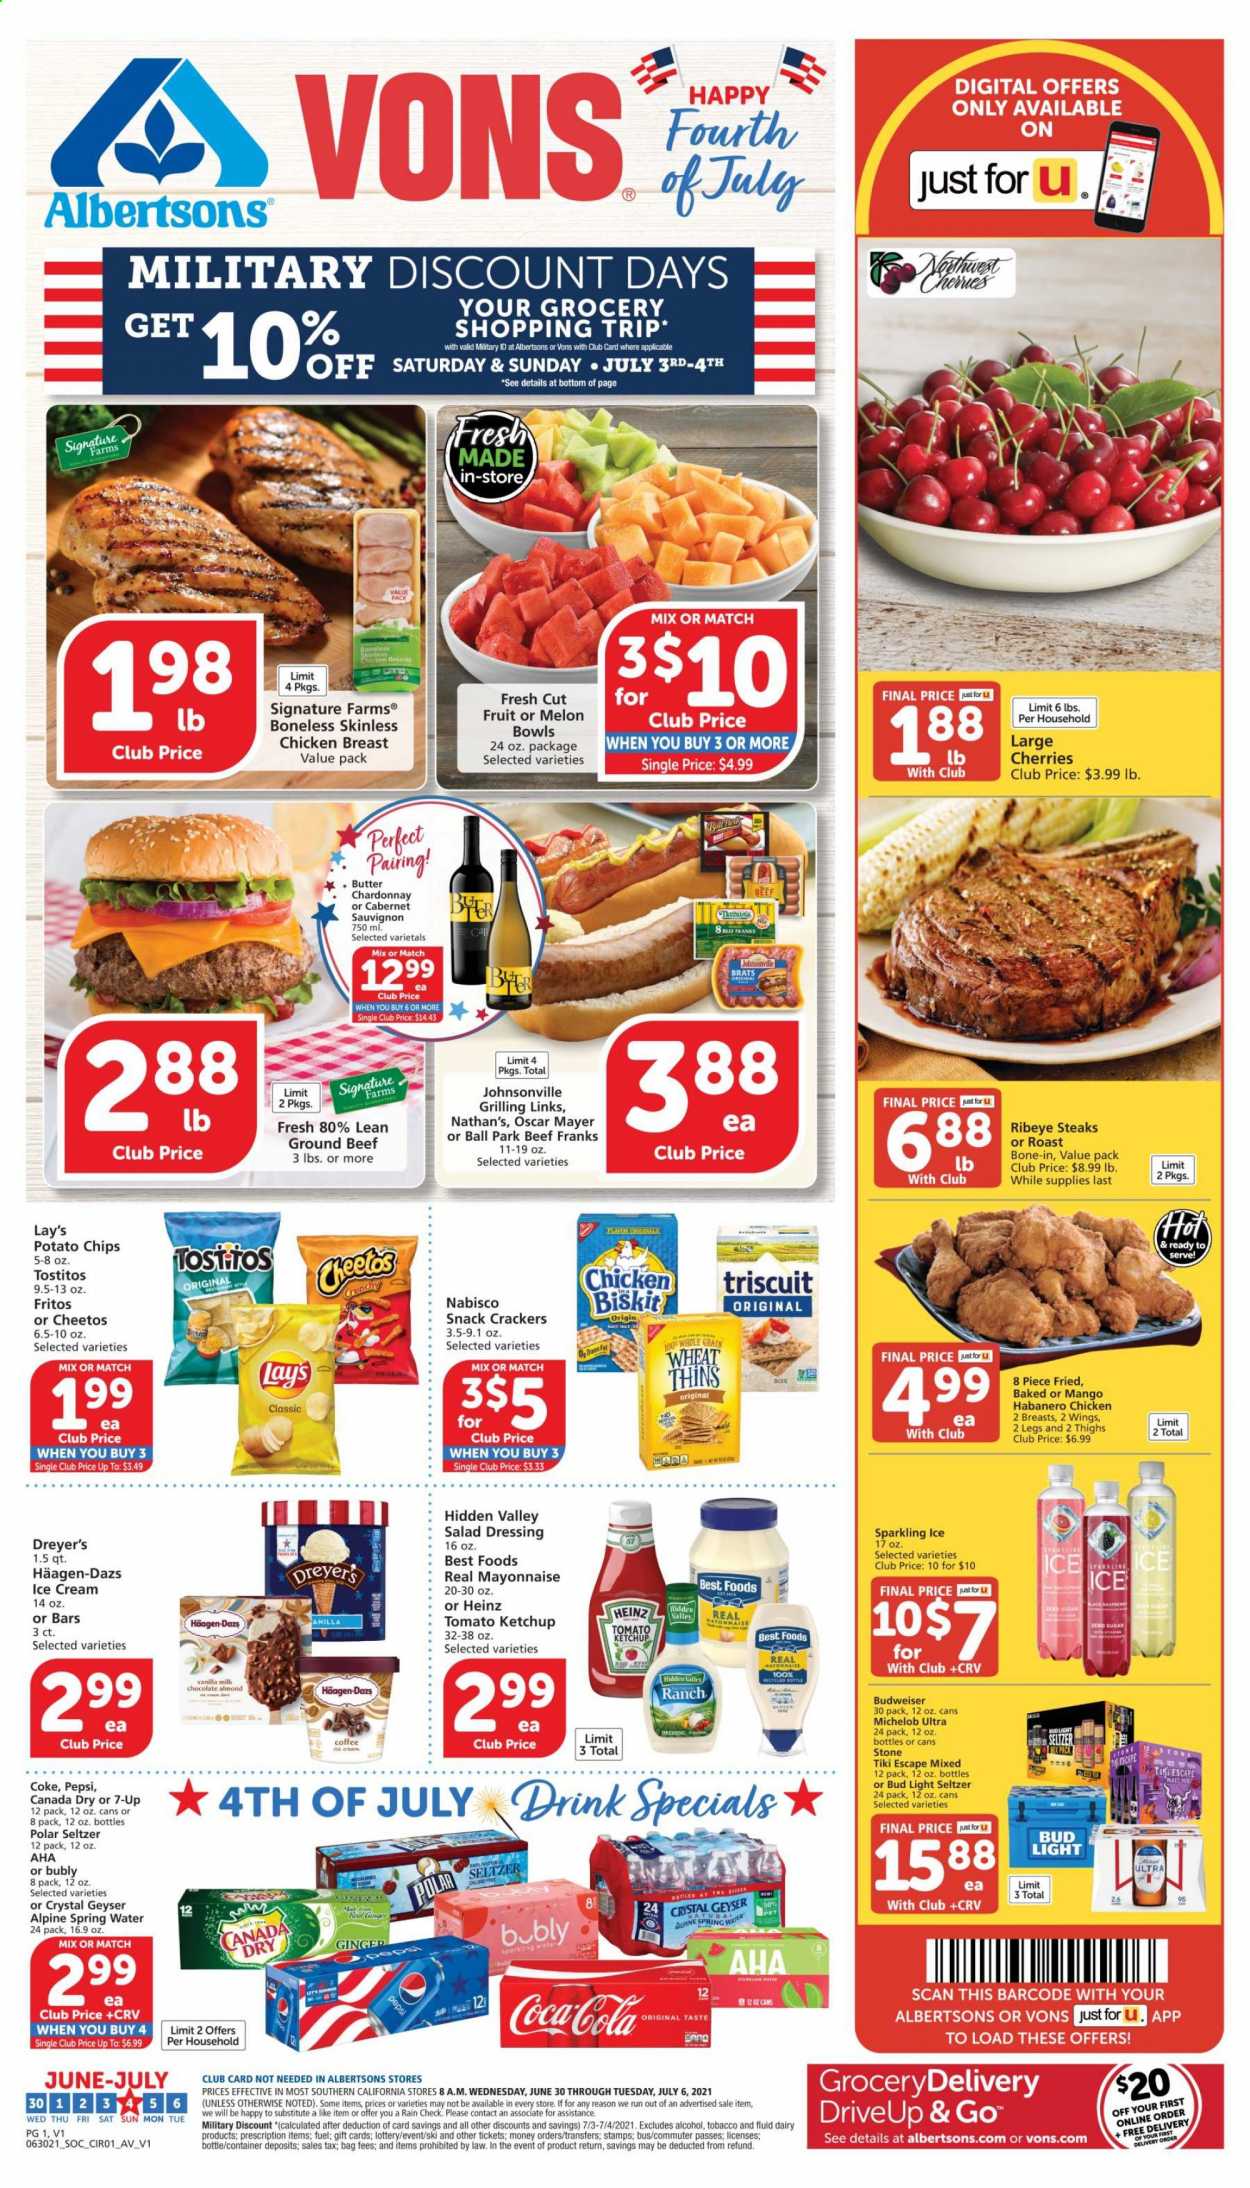 thumbnail - Albertsons Flyer - 06/30/2021 - 07/06/2021 - Sales products - Budweiser, Michelob, ginger, cherries, habanero chicken, Johnsonville, Oscar Mayer, butter, mayonnaise, ice cream, Häagen-Dazs, snack, crackers, Fritos, potato chips, Cheetos, chips, Lay’s, Thins, Tostitos, Heinz, salad dressing, ketchup, dressing, Canada Dry, Coca-Cola, Pepsi, 7UP, spring water, coffee, Cabernet Sauvignon, red wine, white wine, Chardonnay, wine, Hard Seltzer, beer, Bud Light, chicken breasts, beef meat, ground beef, steak, ribeye steak, melons. Page 1.